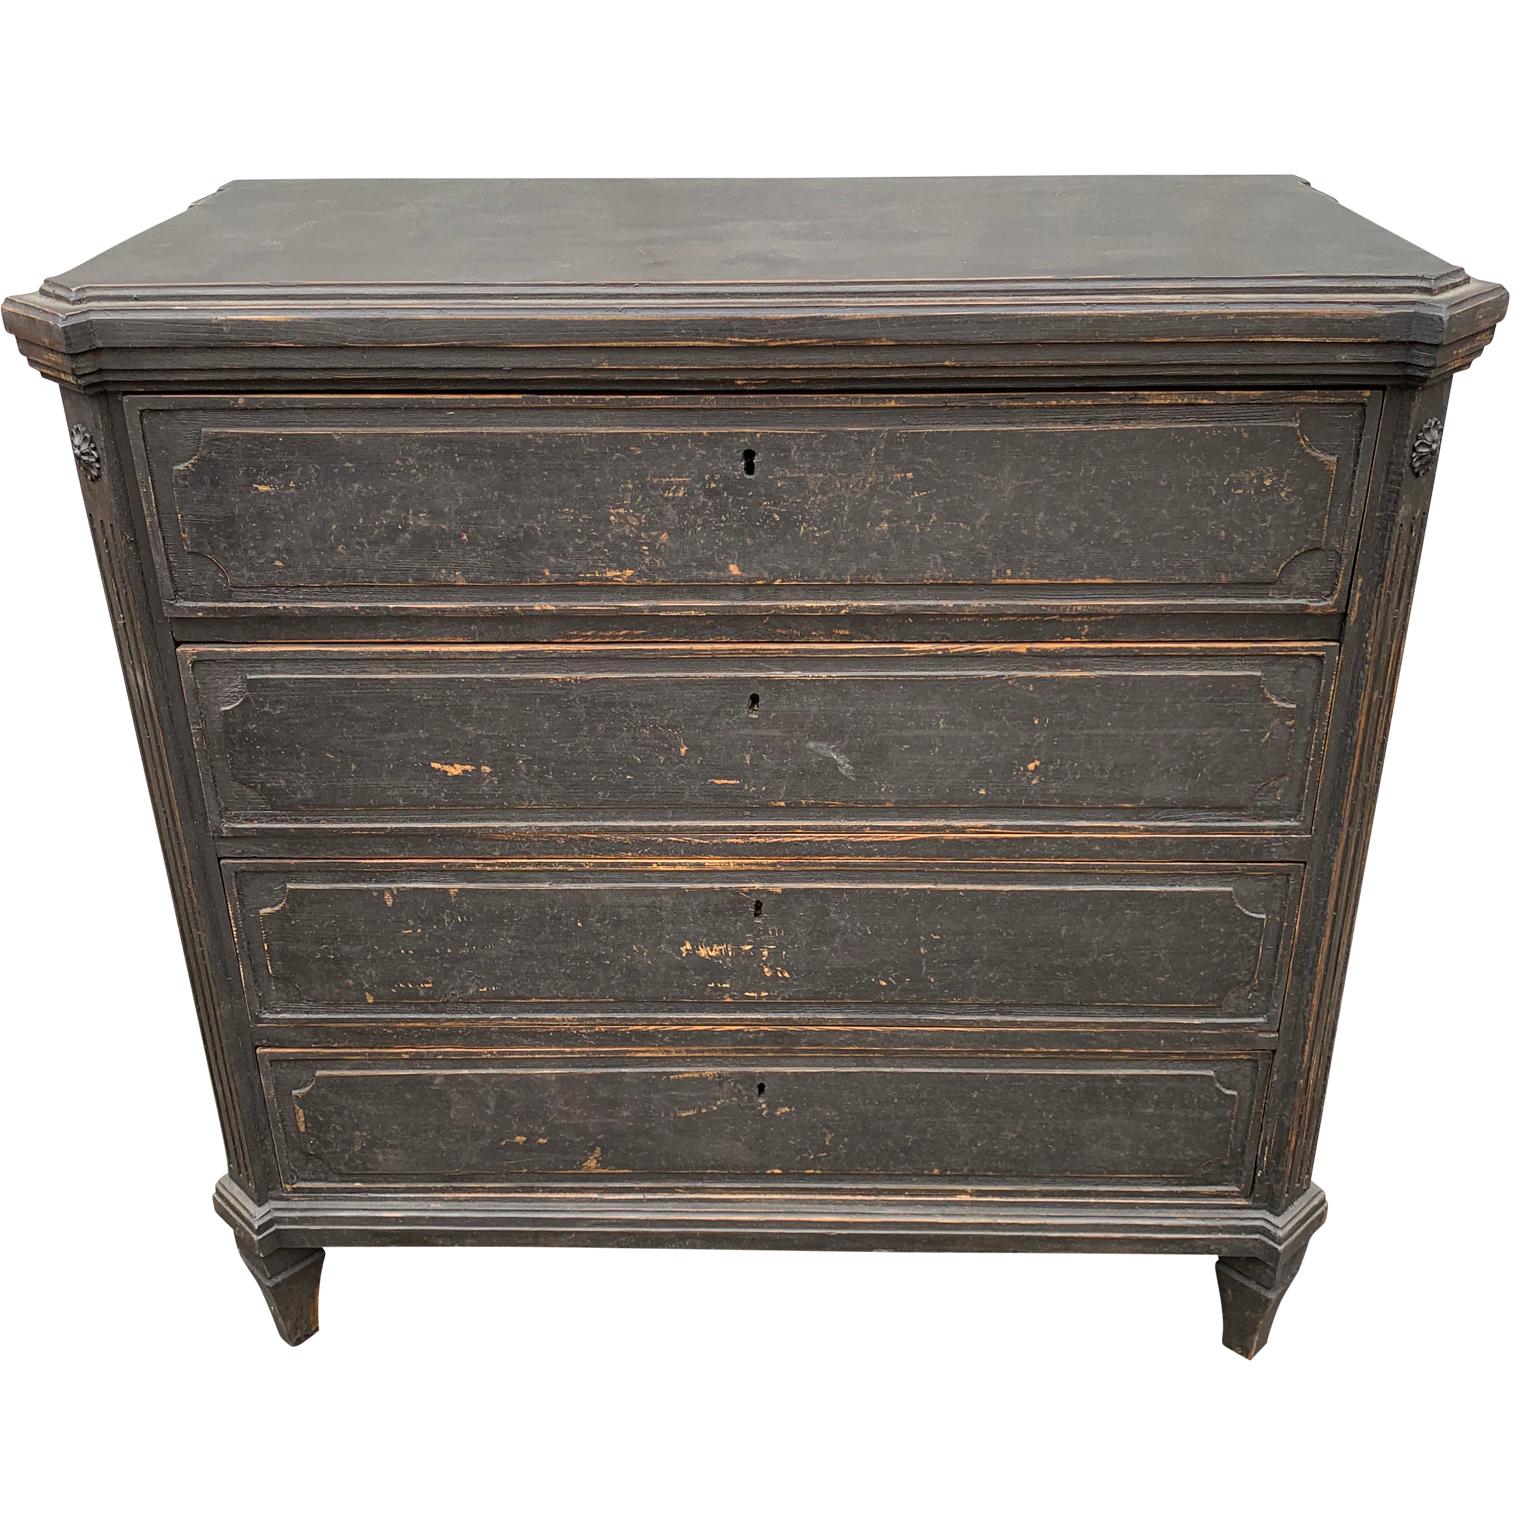 Swedish 19th century four drawer black painted chest of drawer.

EUR 175 front door delivery to most areas of London UK, The Netherlands, Belgium, Denmark, Sweden and Northern Germany.